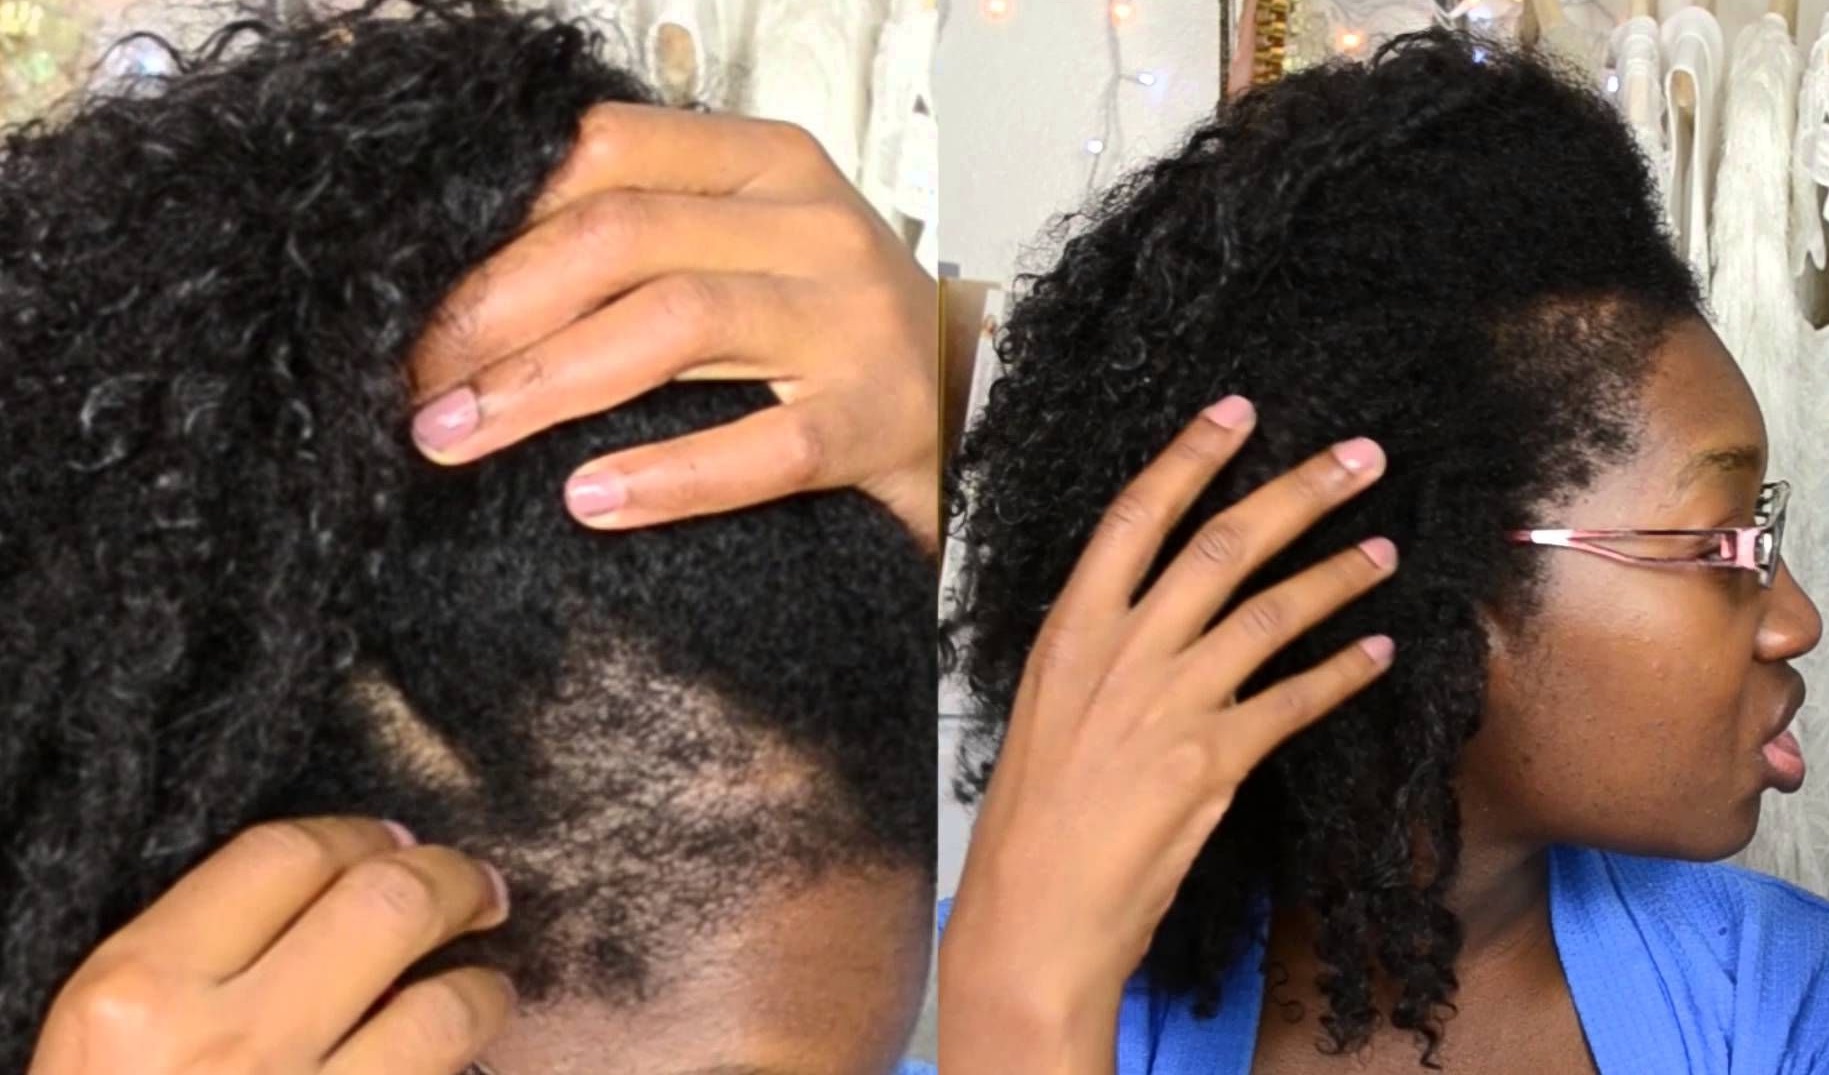 grow hair with bow braids fast. traction alopecia from tight hairstyles and hair growth. NHP